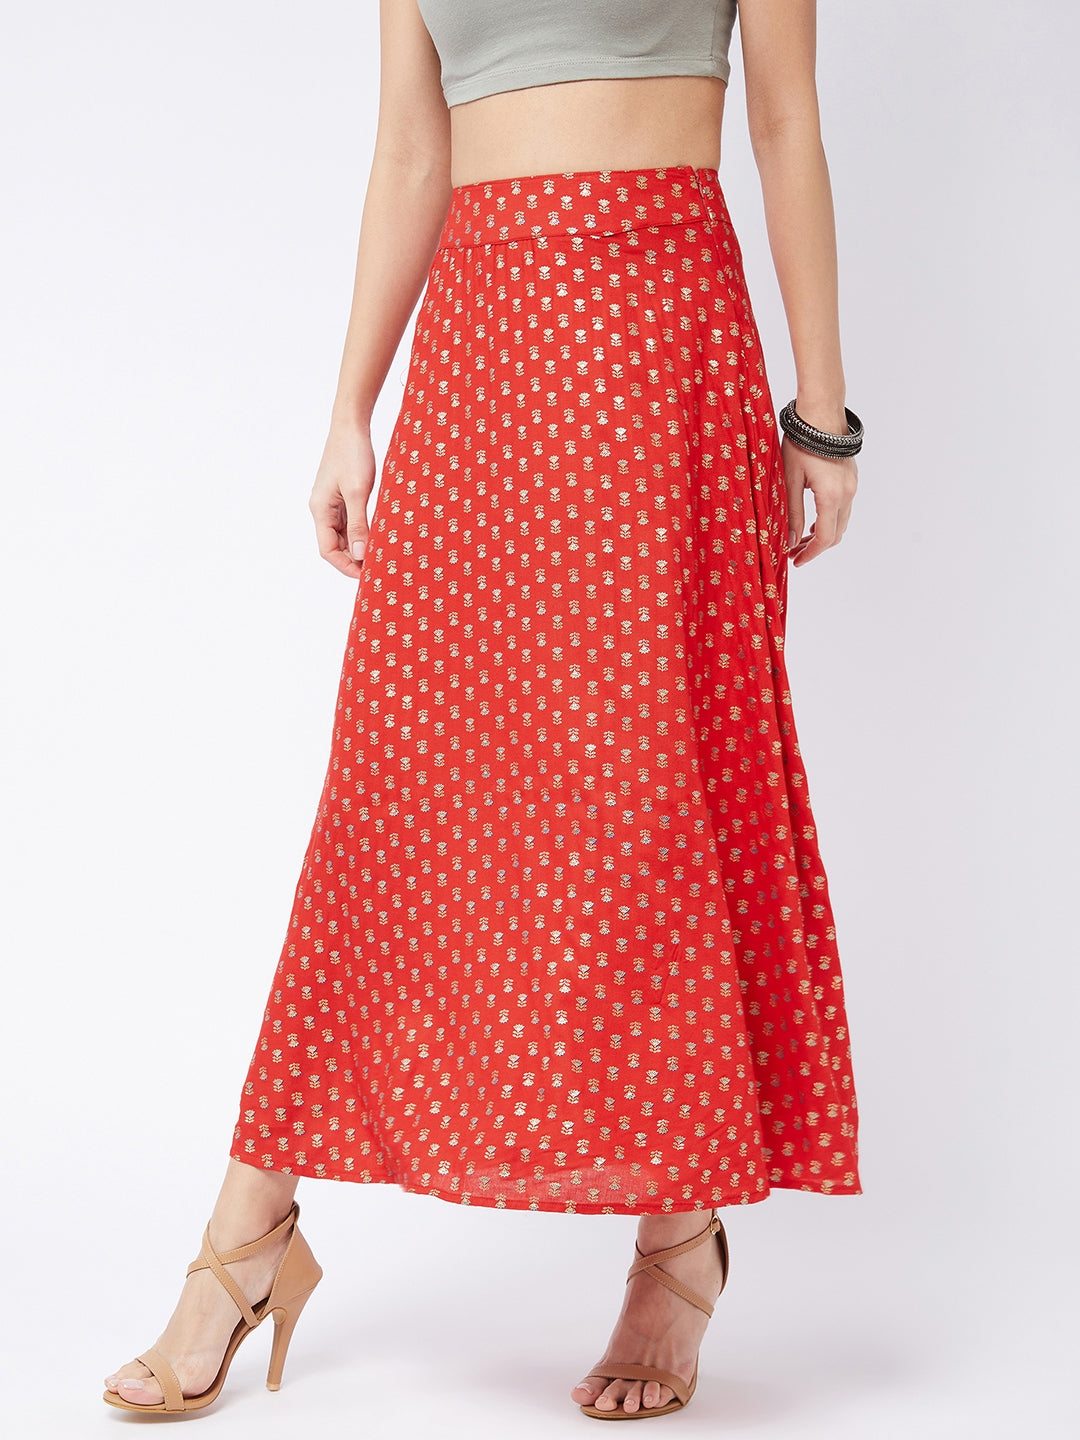 Current Red Gold Print Long Skirt